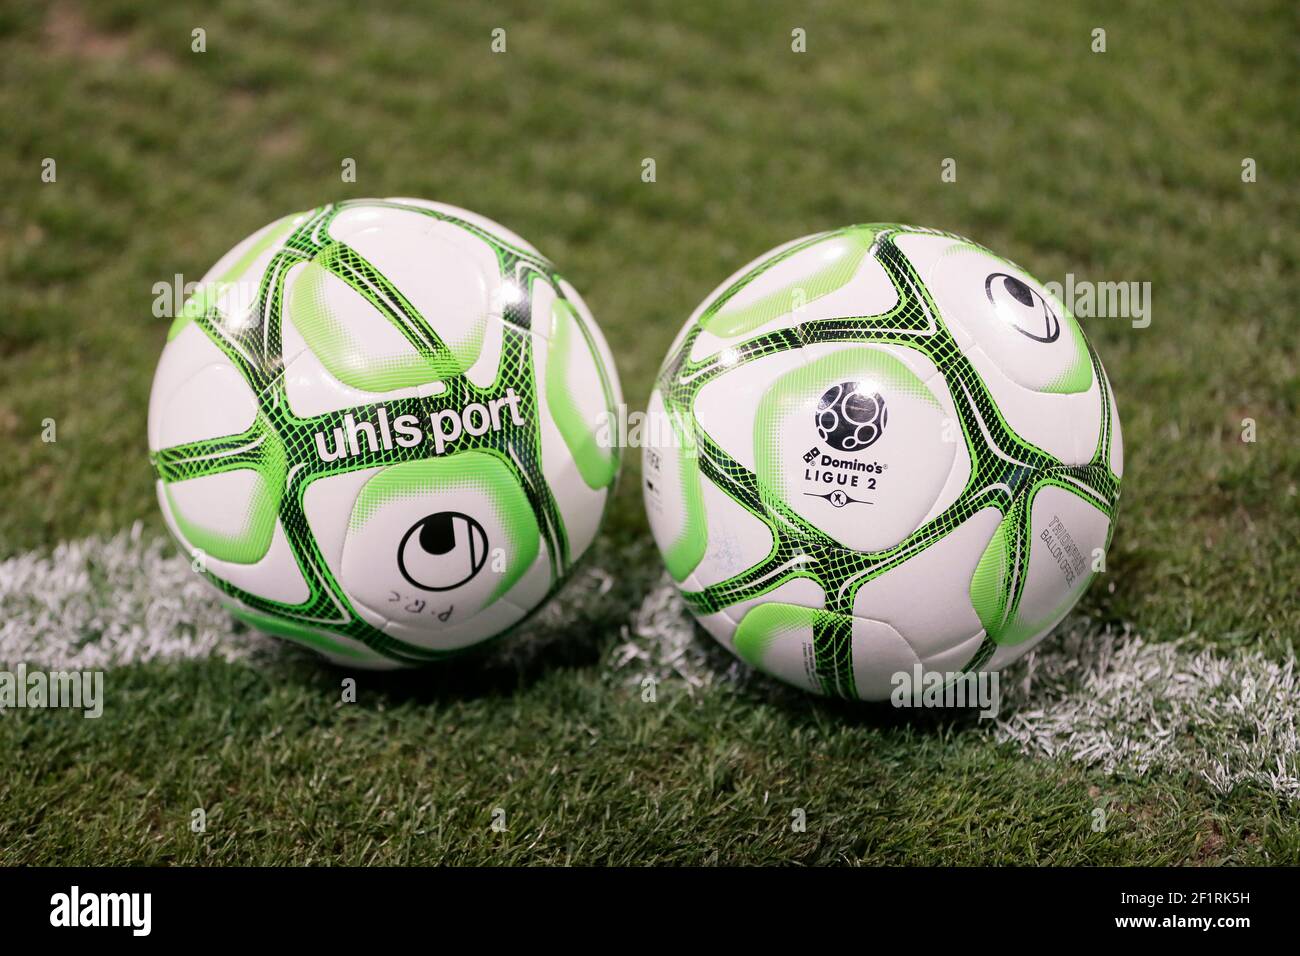 Official soccer balls Uhlsport Domino s Ligue 2 during the French  championship Ligue 2 football match between Paris FC and Clermont Foot 63  on September 20, 2019 at Charlety stadium in Paris,